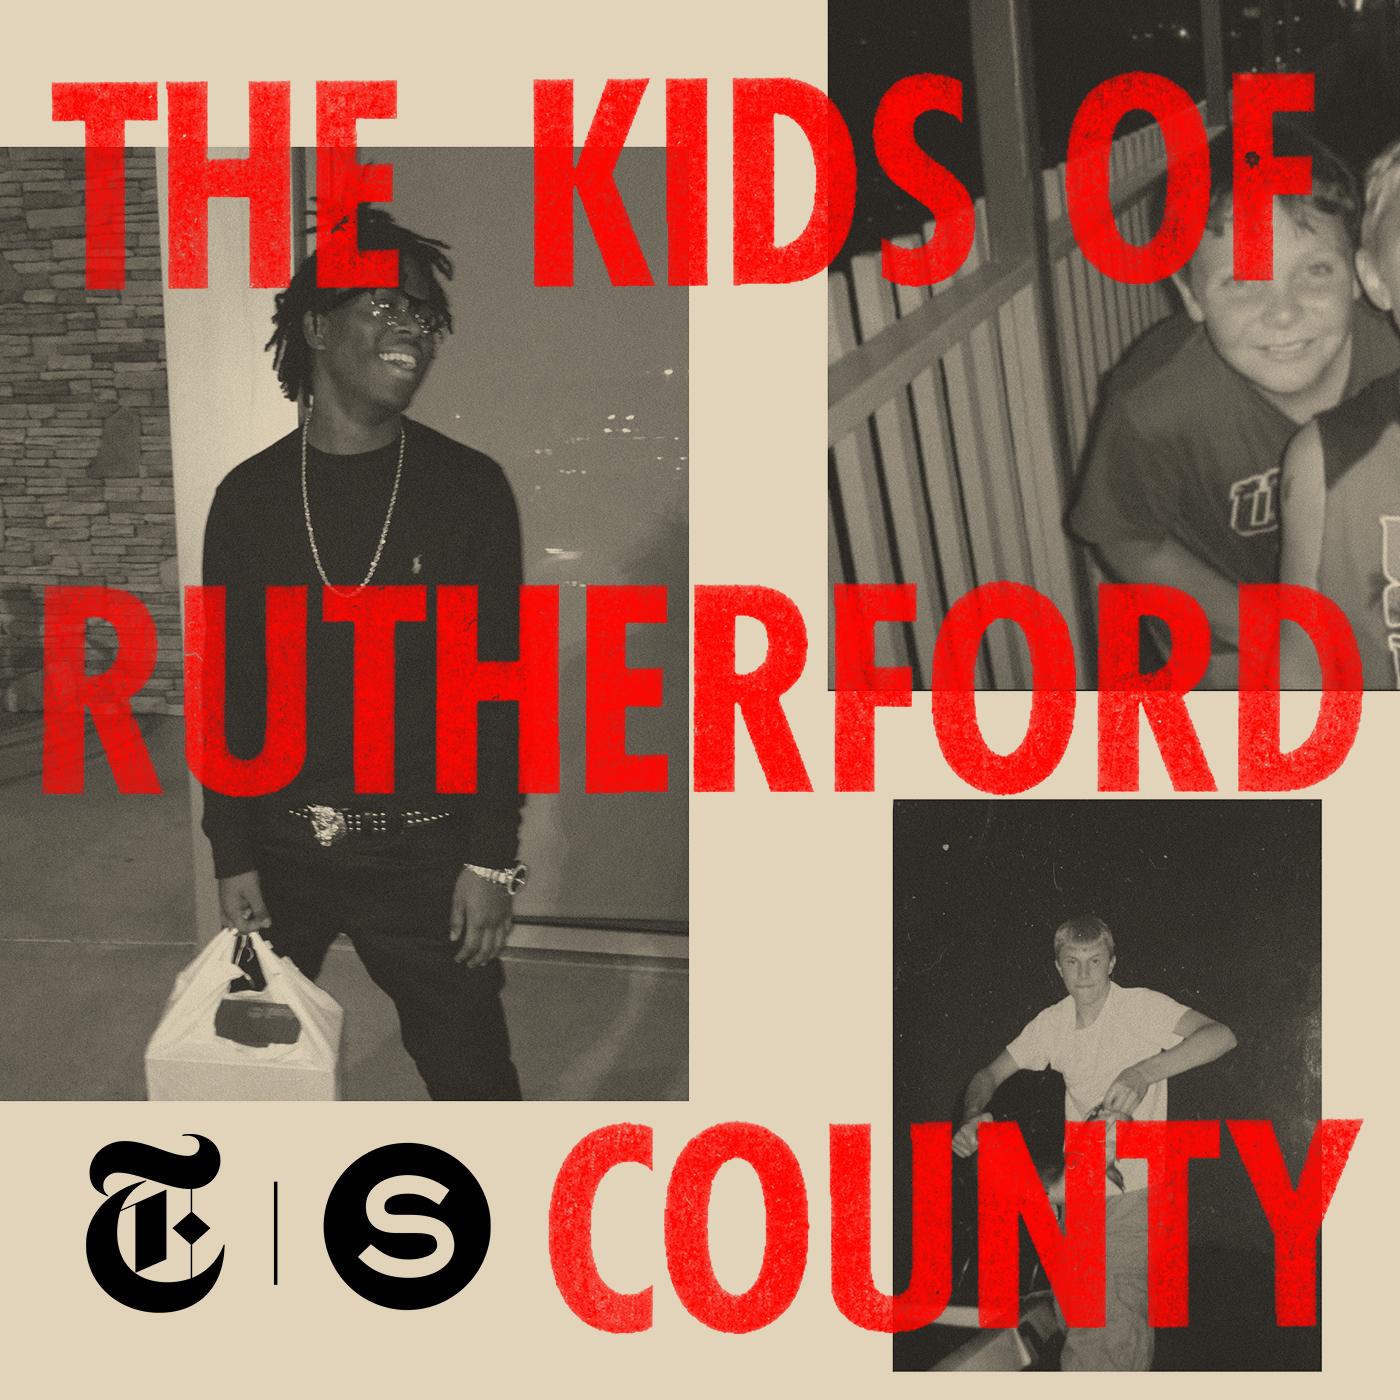 Thumbnail for "Coming Soon: The Kids of Rutherford County".